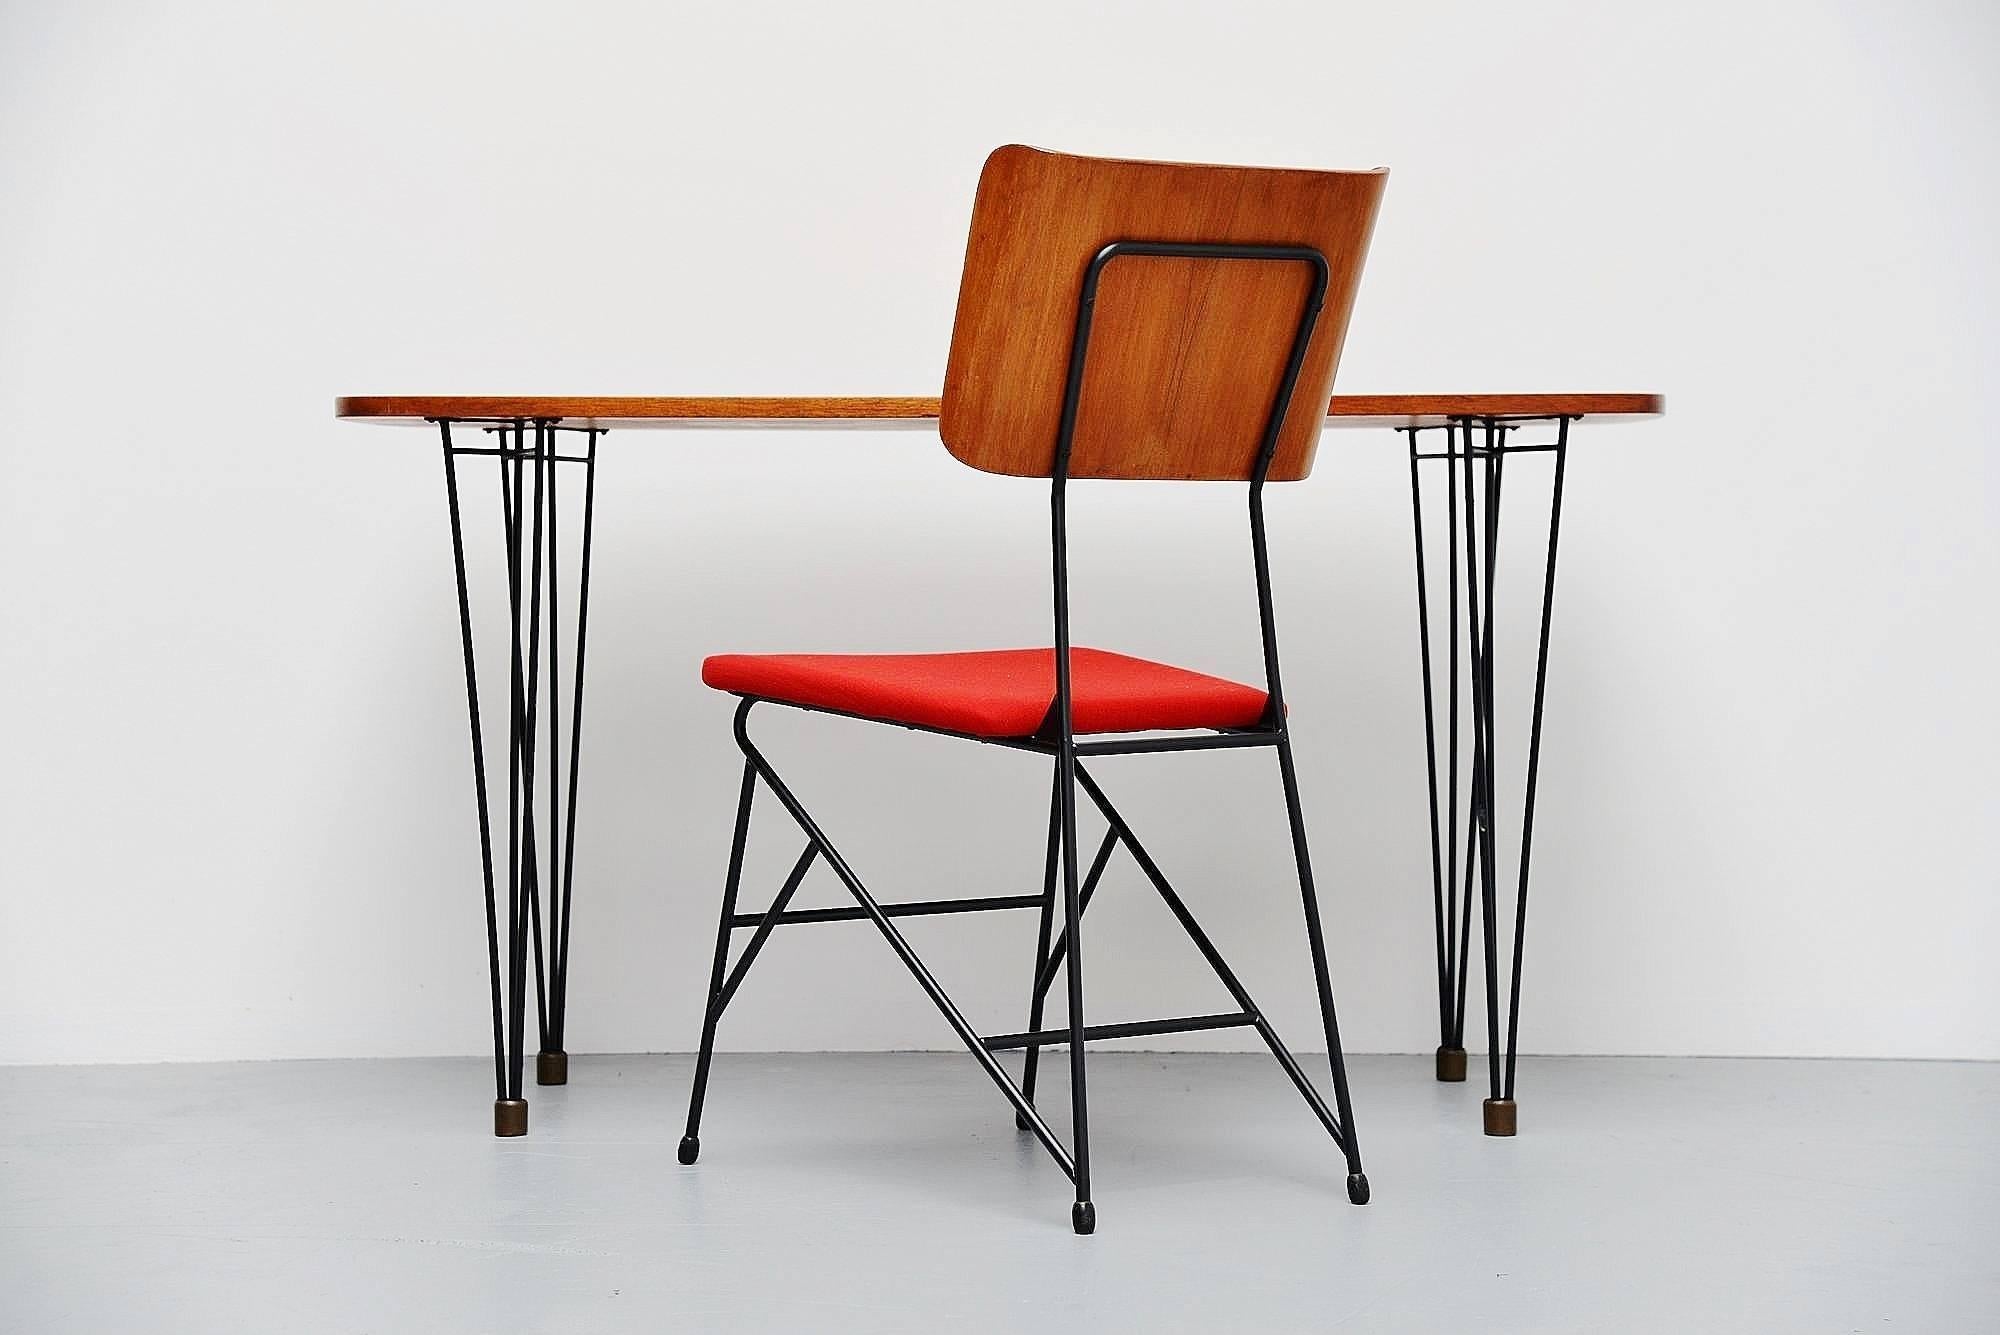 Very writing table and chair designed by Carlo Ratti, manufactured by Legni Curva, Italy, 1950. The chair has a solid metal frame, black lacquered, same as the table, but the table has brass feet. The chair has a teak plywood back and red newly